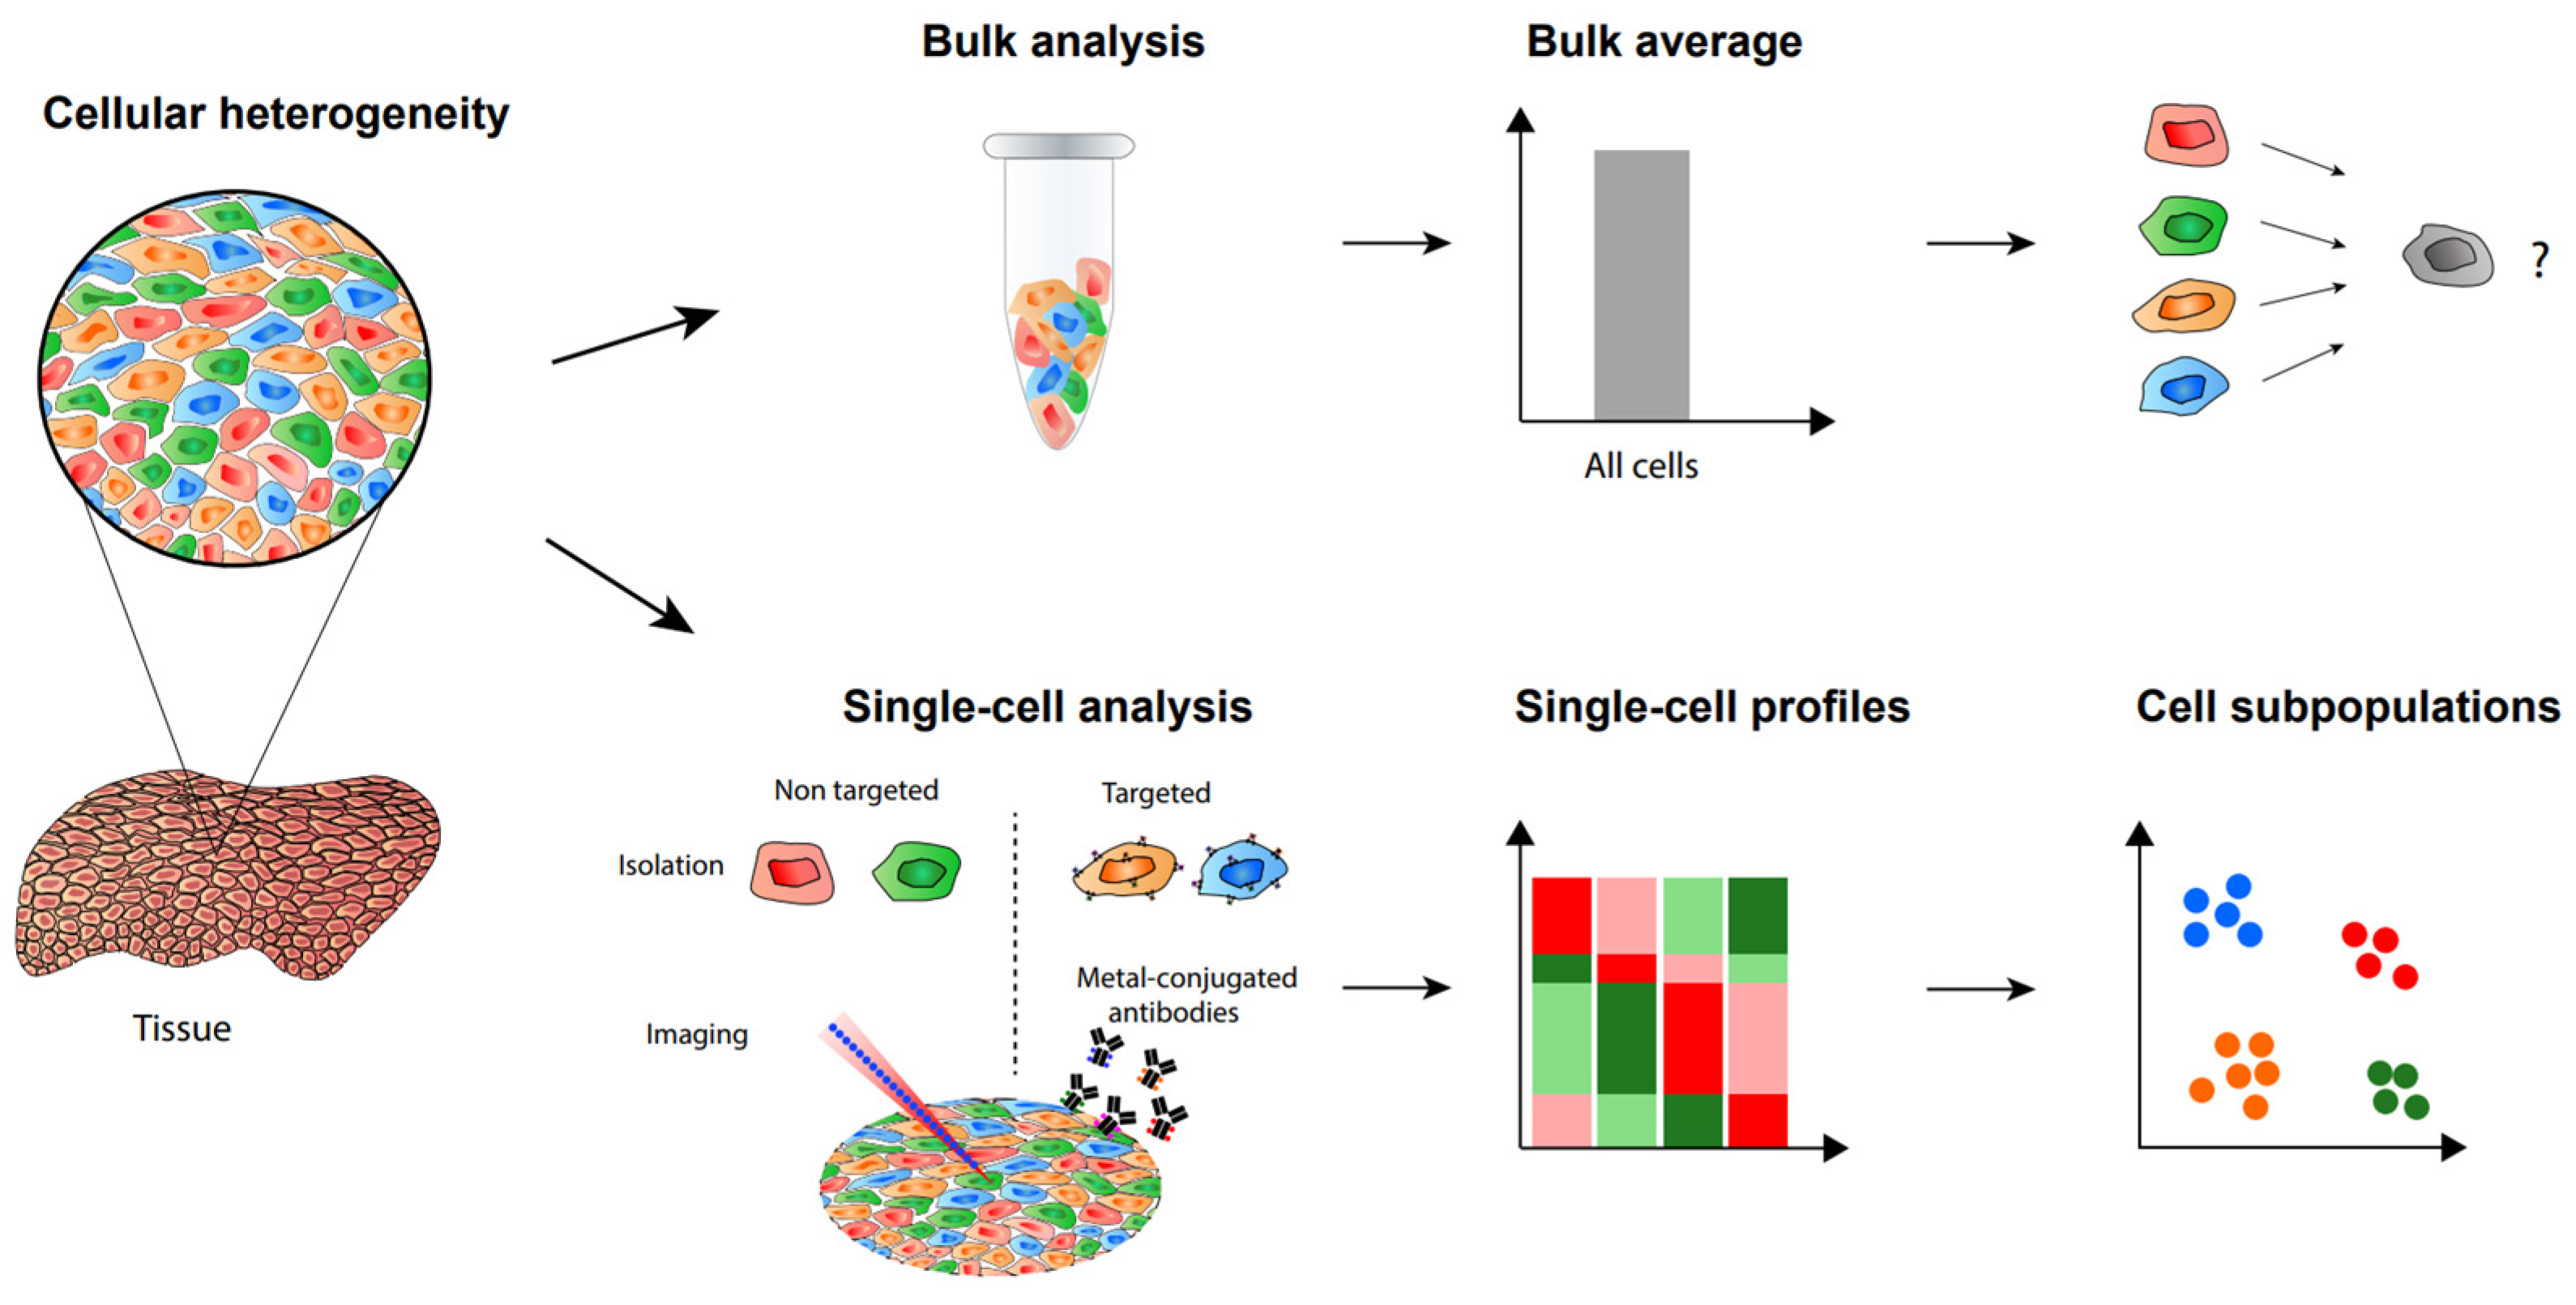 Bacterial species identification using MALDI-TOF mass spectrometry and  machine learning techniques: A large-scale benchmarking study -  Computational and Structural Biotechnology Journal